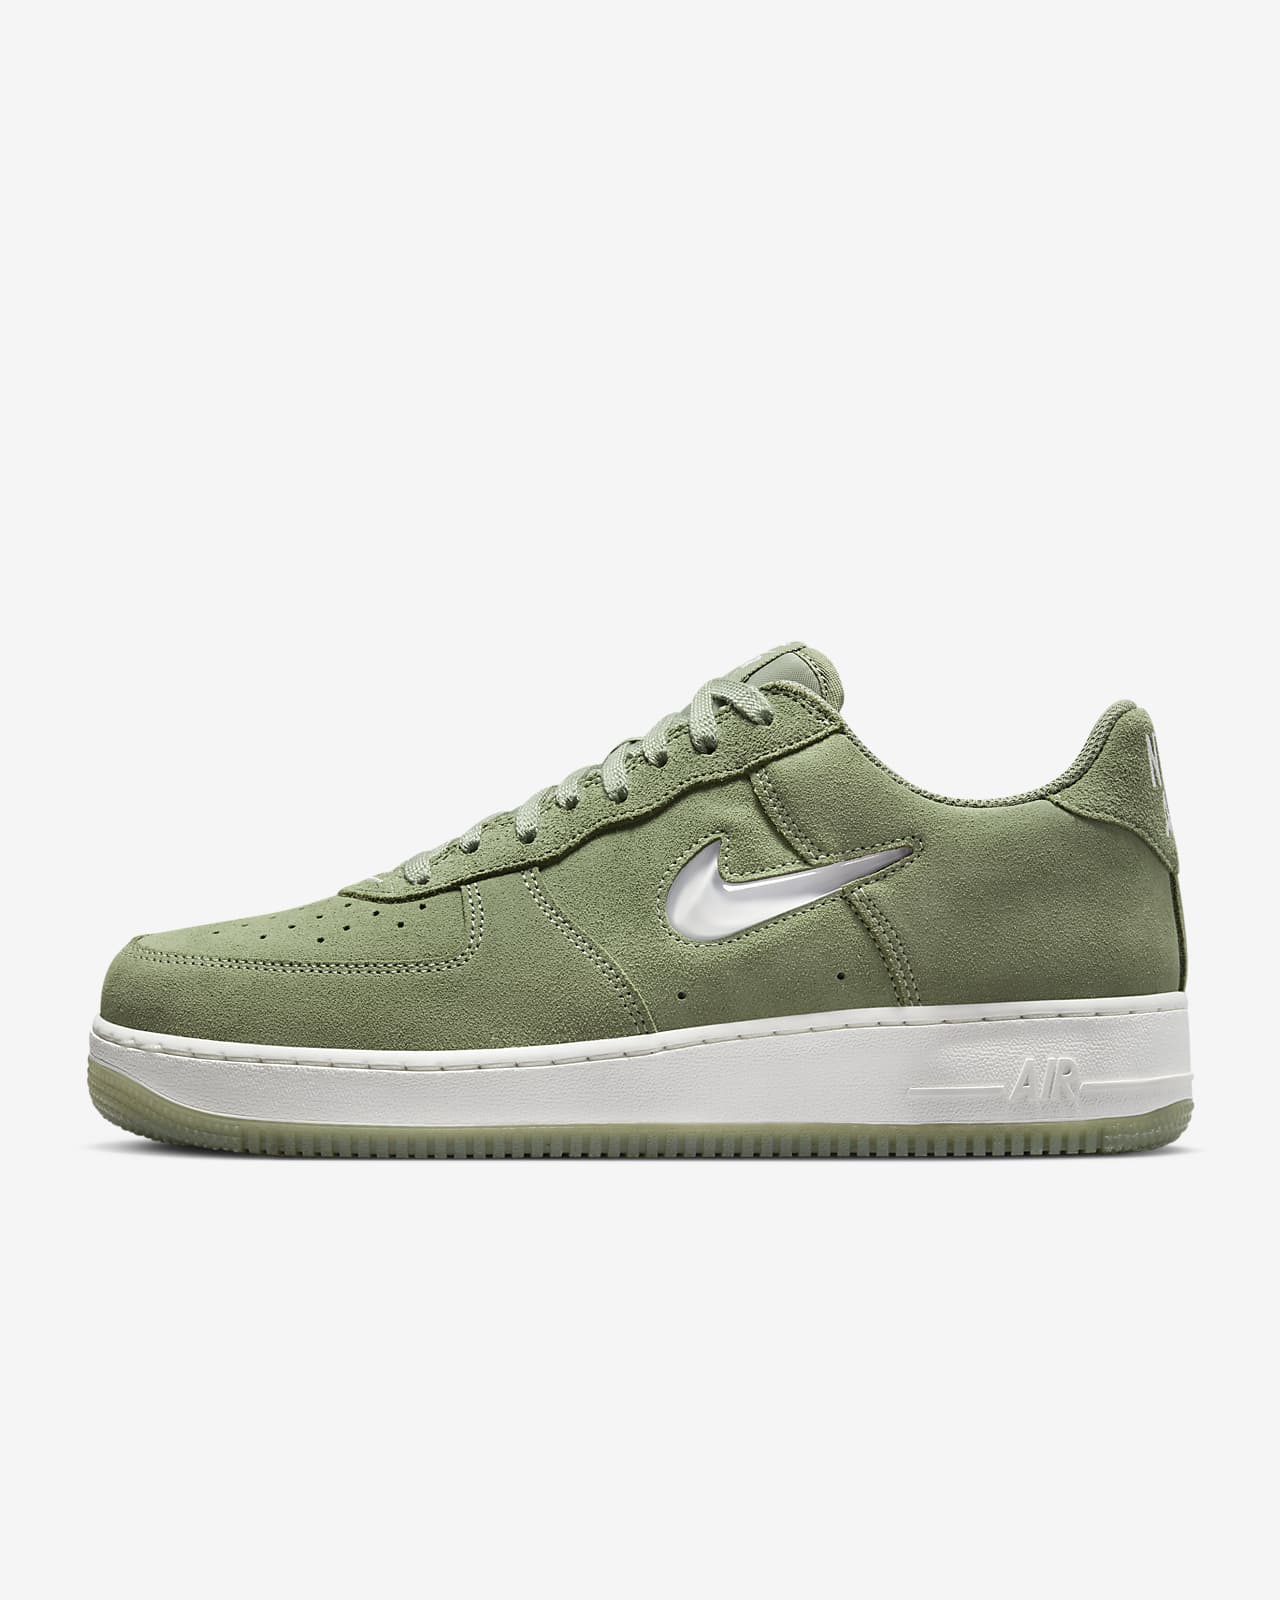 Nike Air Force 1 Sage Green Suede Trainers